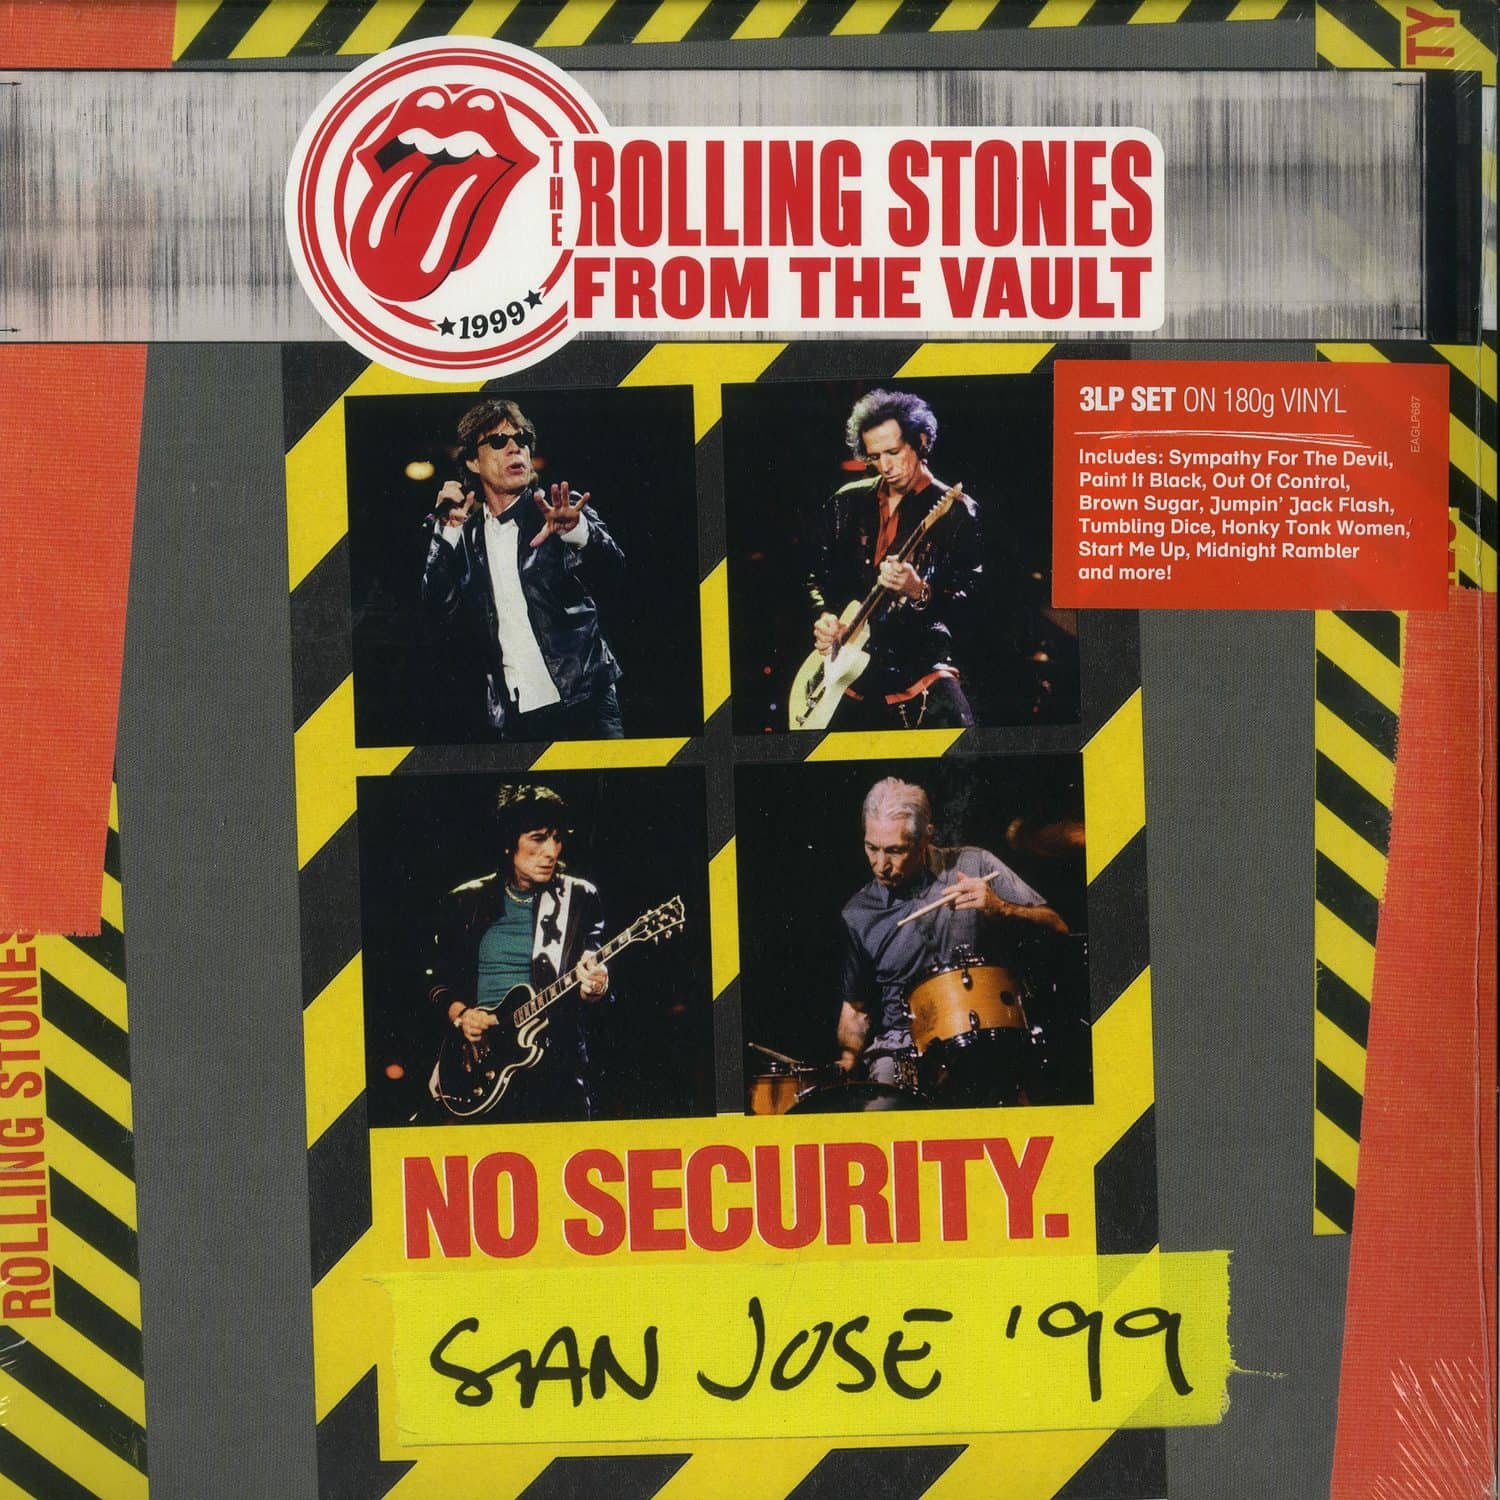 The Rolling Stones - FROM THE VAULT: NO SECURITY. SAN JOSE 99 